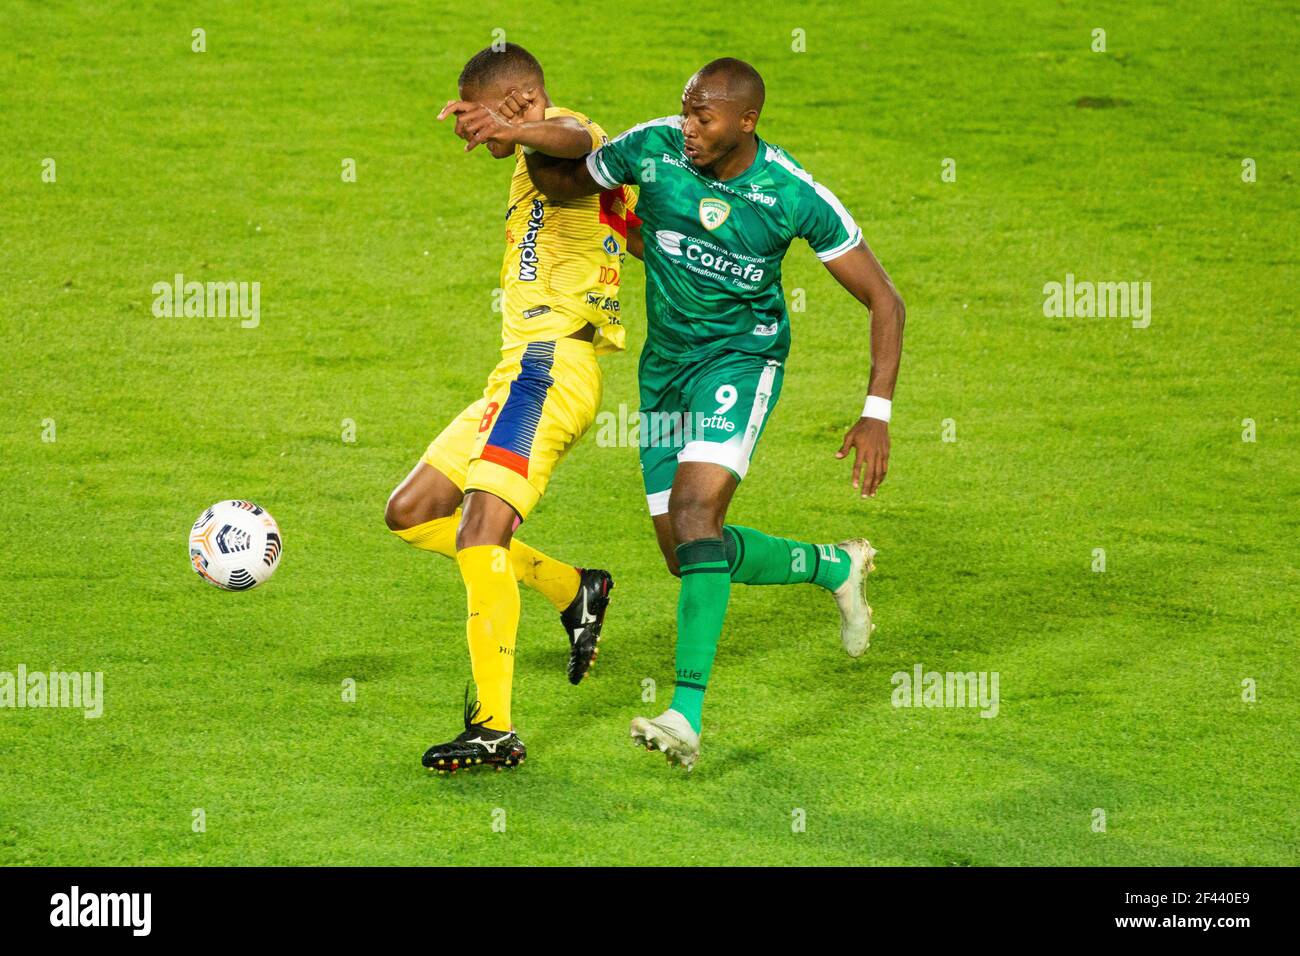 Bogota, Colombia, March 18, 2021: Diego Herazo from Equidad FC disputes the ball with Almir Soto from Deportivo Pasto during the first leg match as part of the 2021 CONMEBOL South American Cup between La Equidad FC and Deportivo Pasto from Colombia played at the El CampÃ-n stadium in the city of BogotÃ Credit: Daniel Garzon Herazo/ZUMA Wire/Alamy Live News Stock Photo